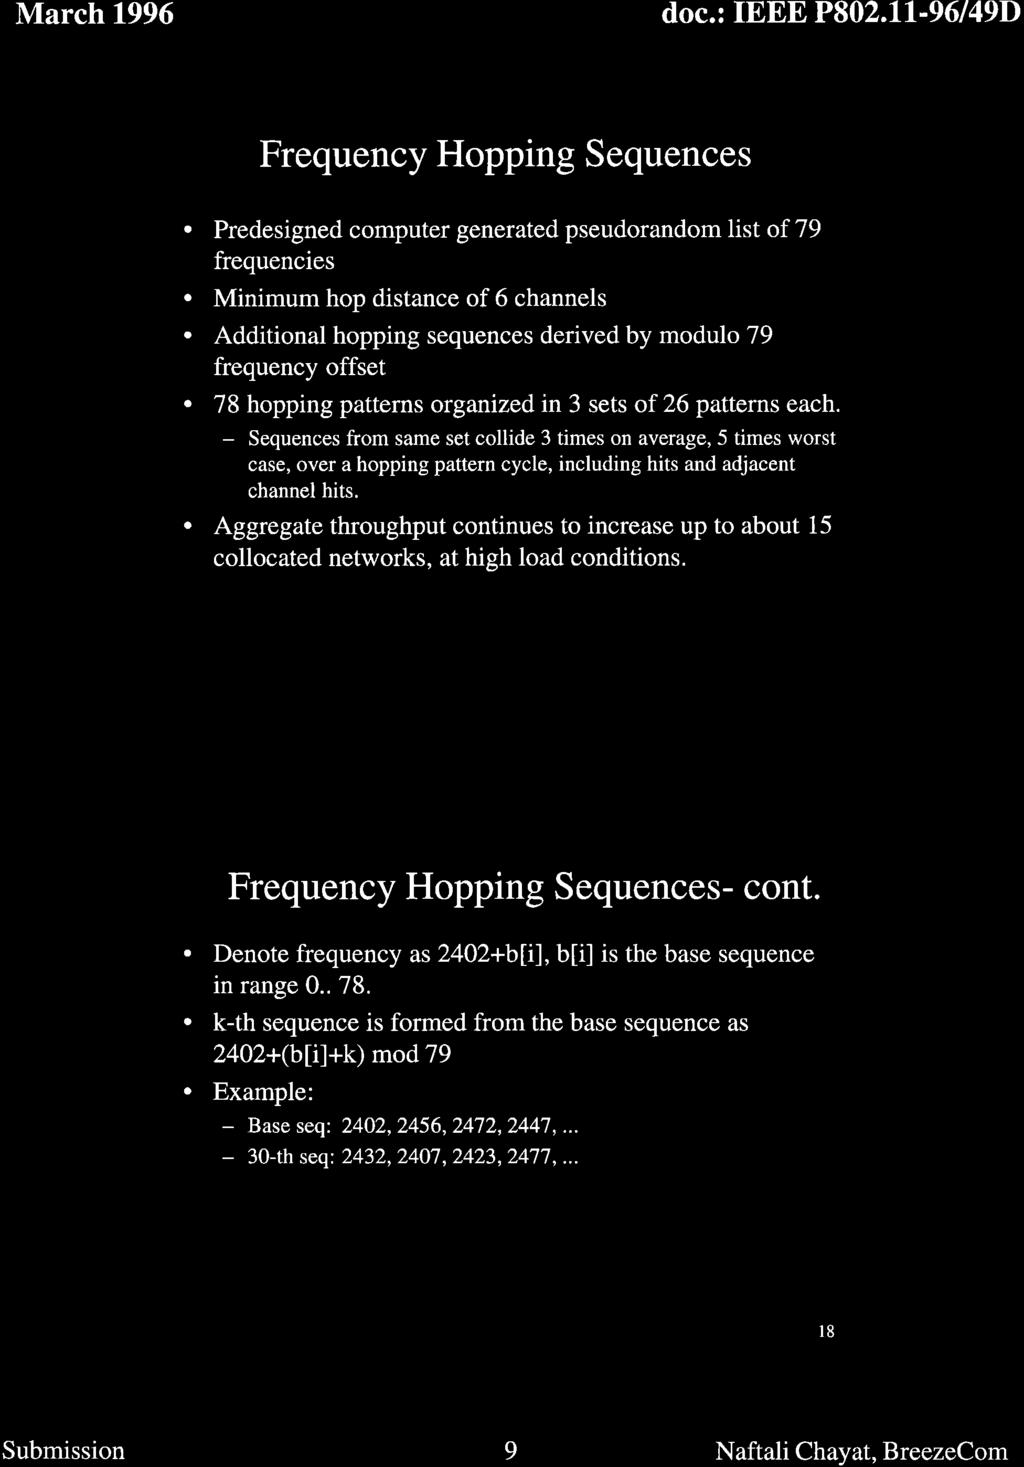 Frequency Hopping Sequences Predesigned computer generated pseudorandom list of 79 frequencies Minimum hop distance of 6 channels Additional hopping sequences derived by modulo 79 frequency offset 78